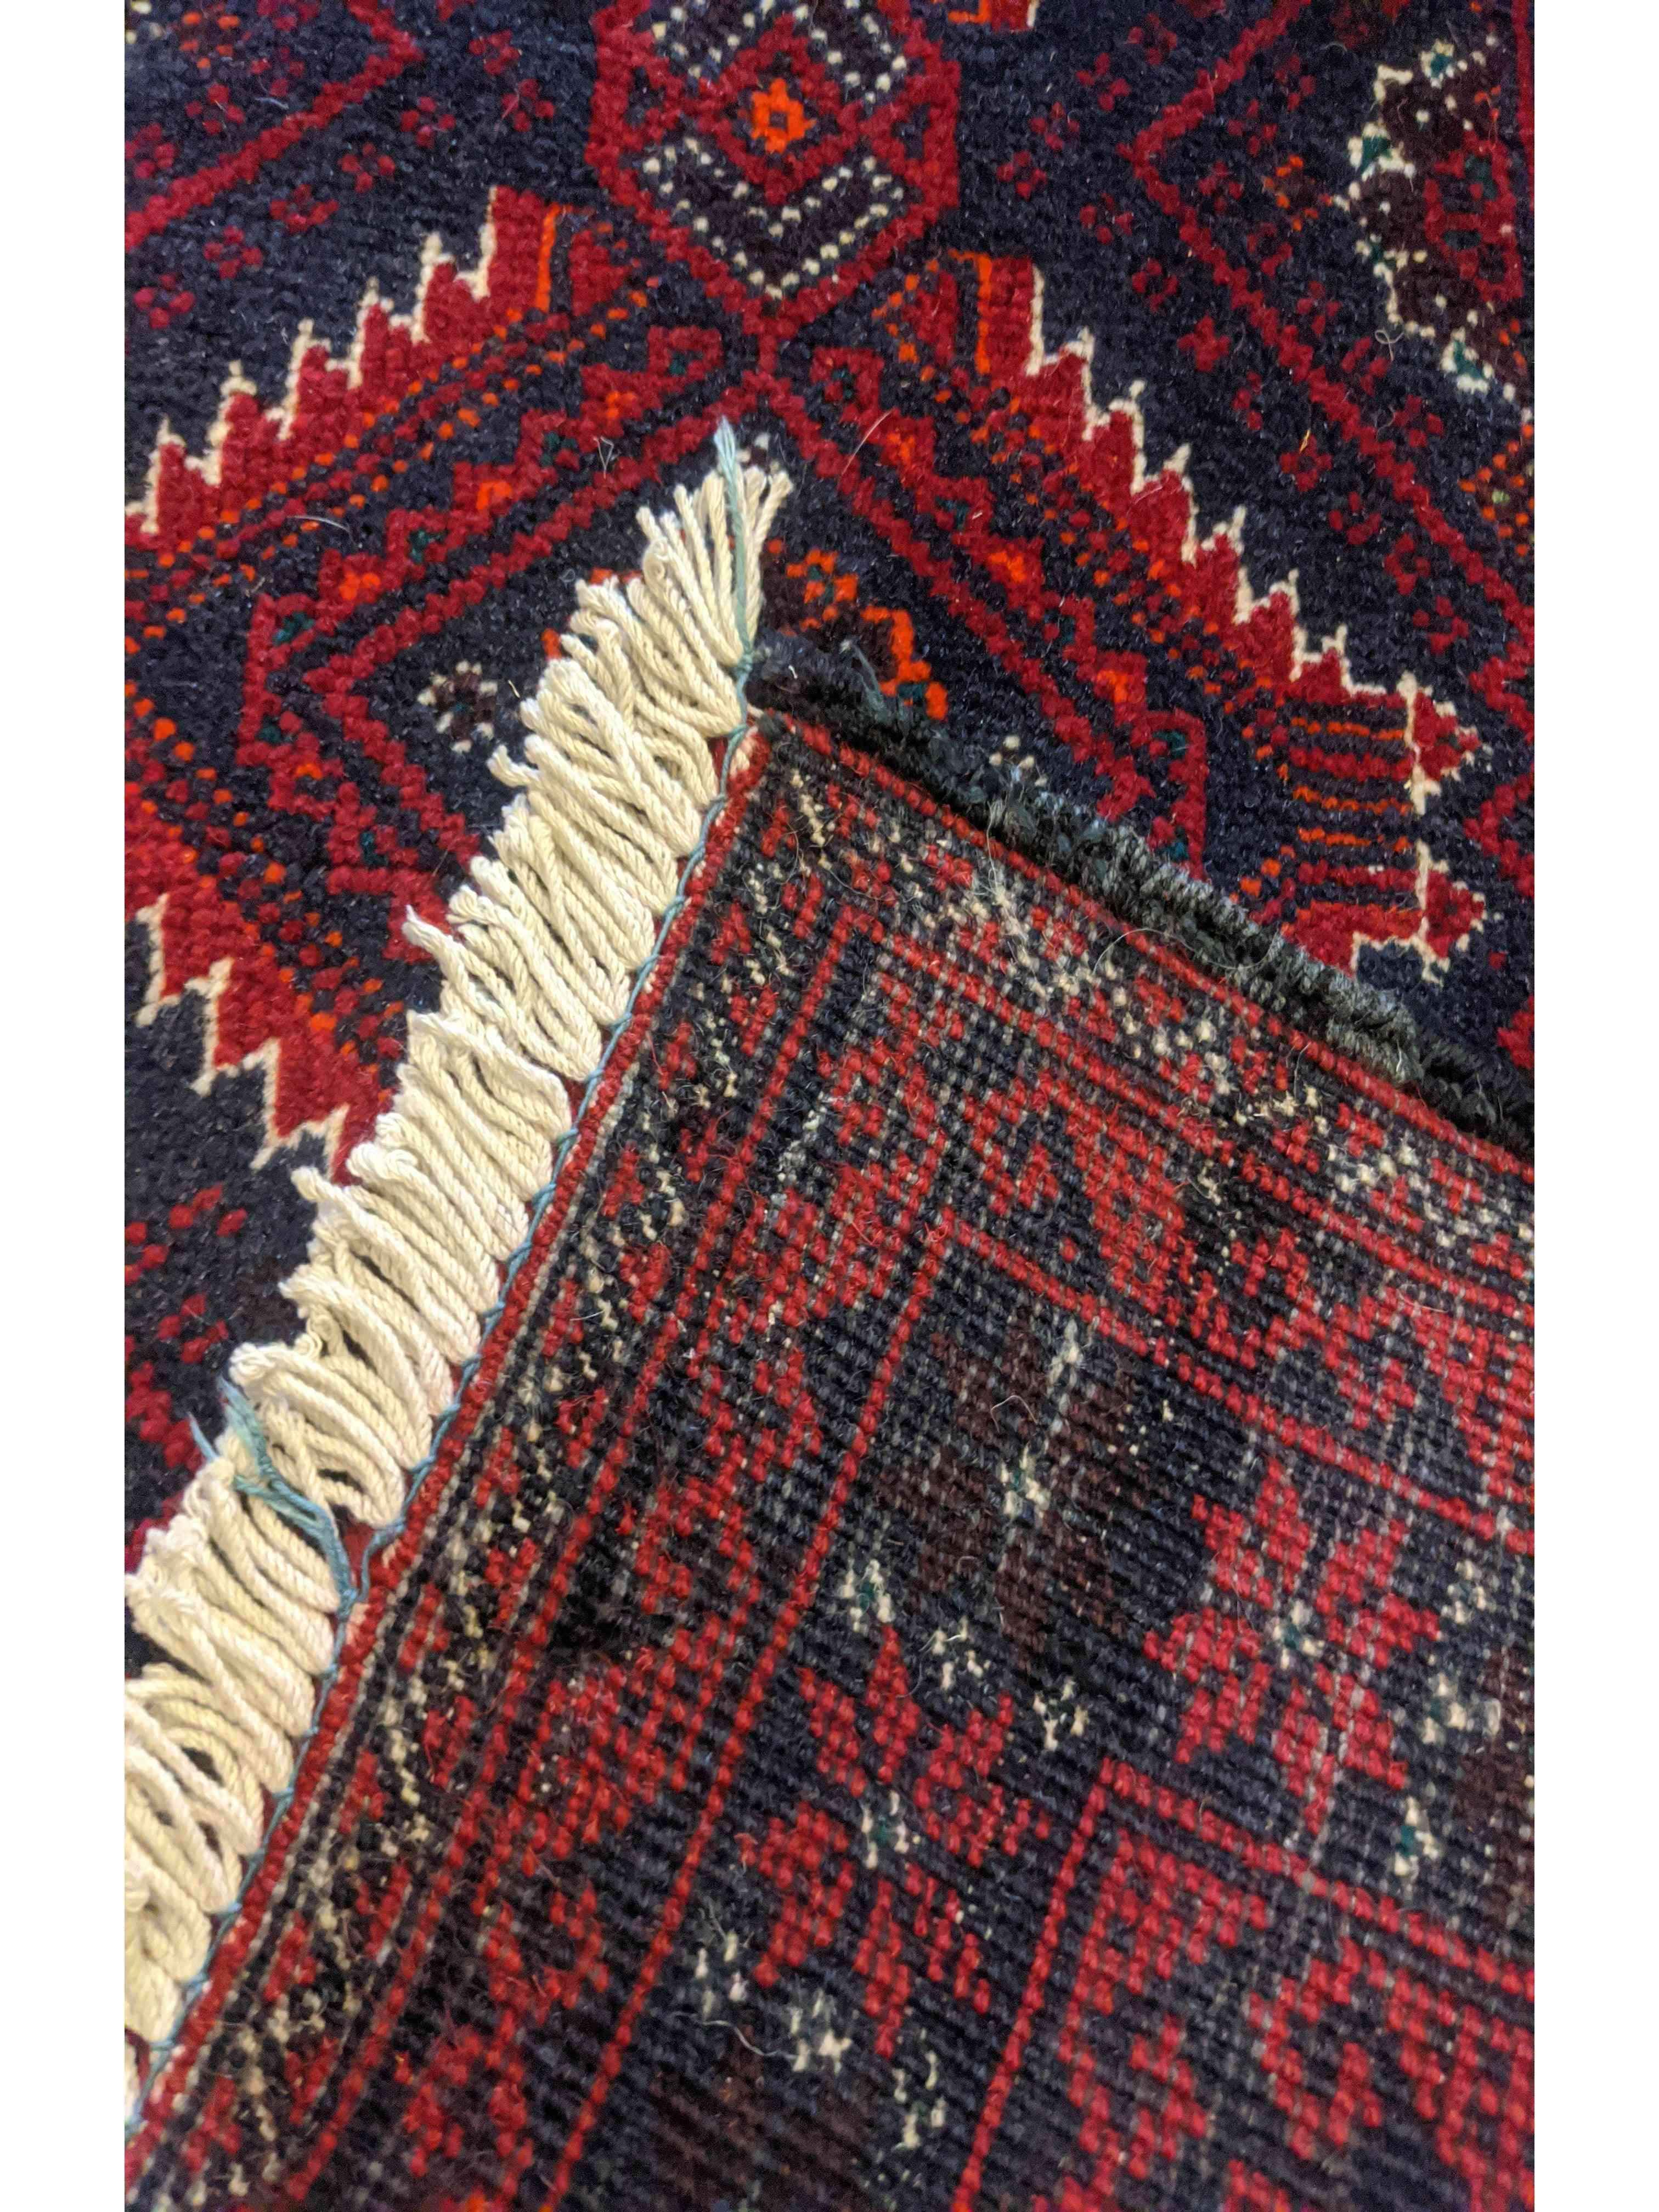 285 x 64 cm Persian Baluch Tribal Red Rug - Rugmaster